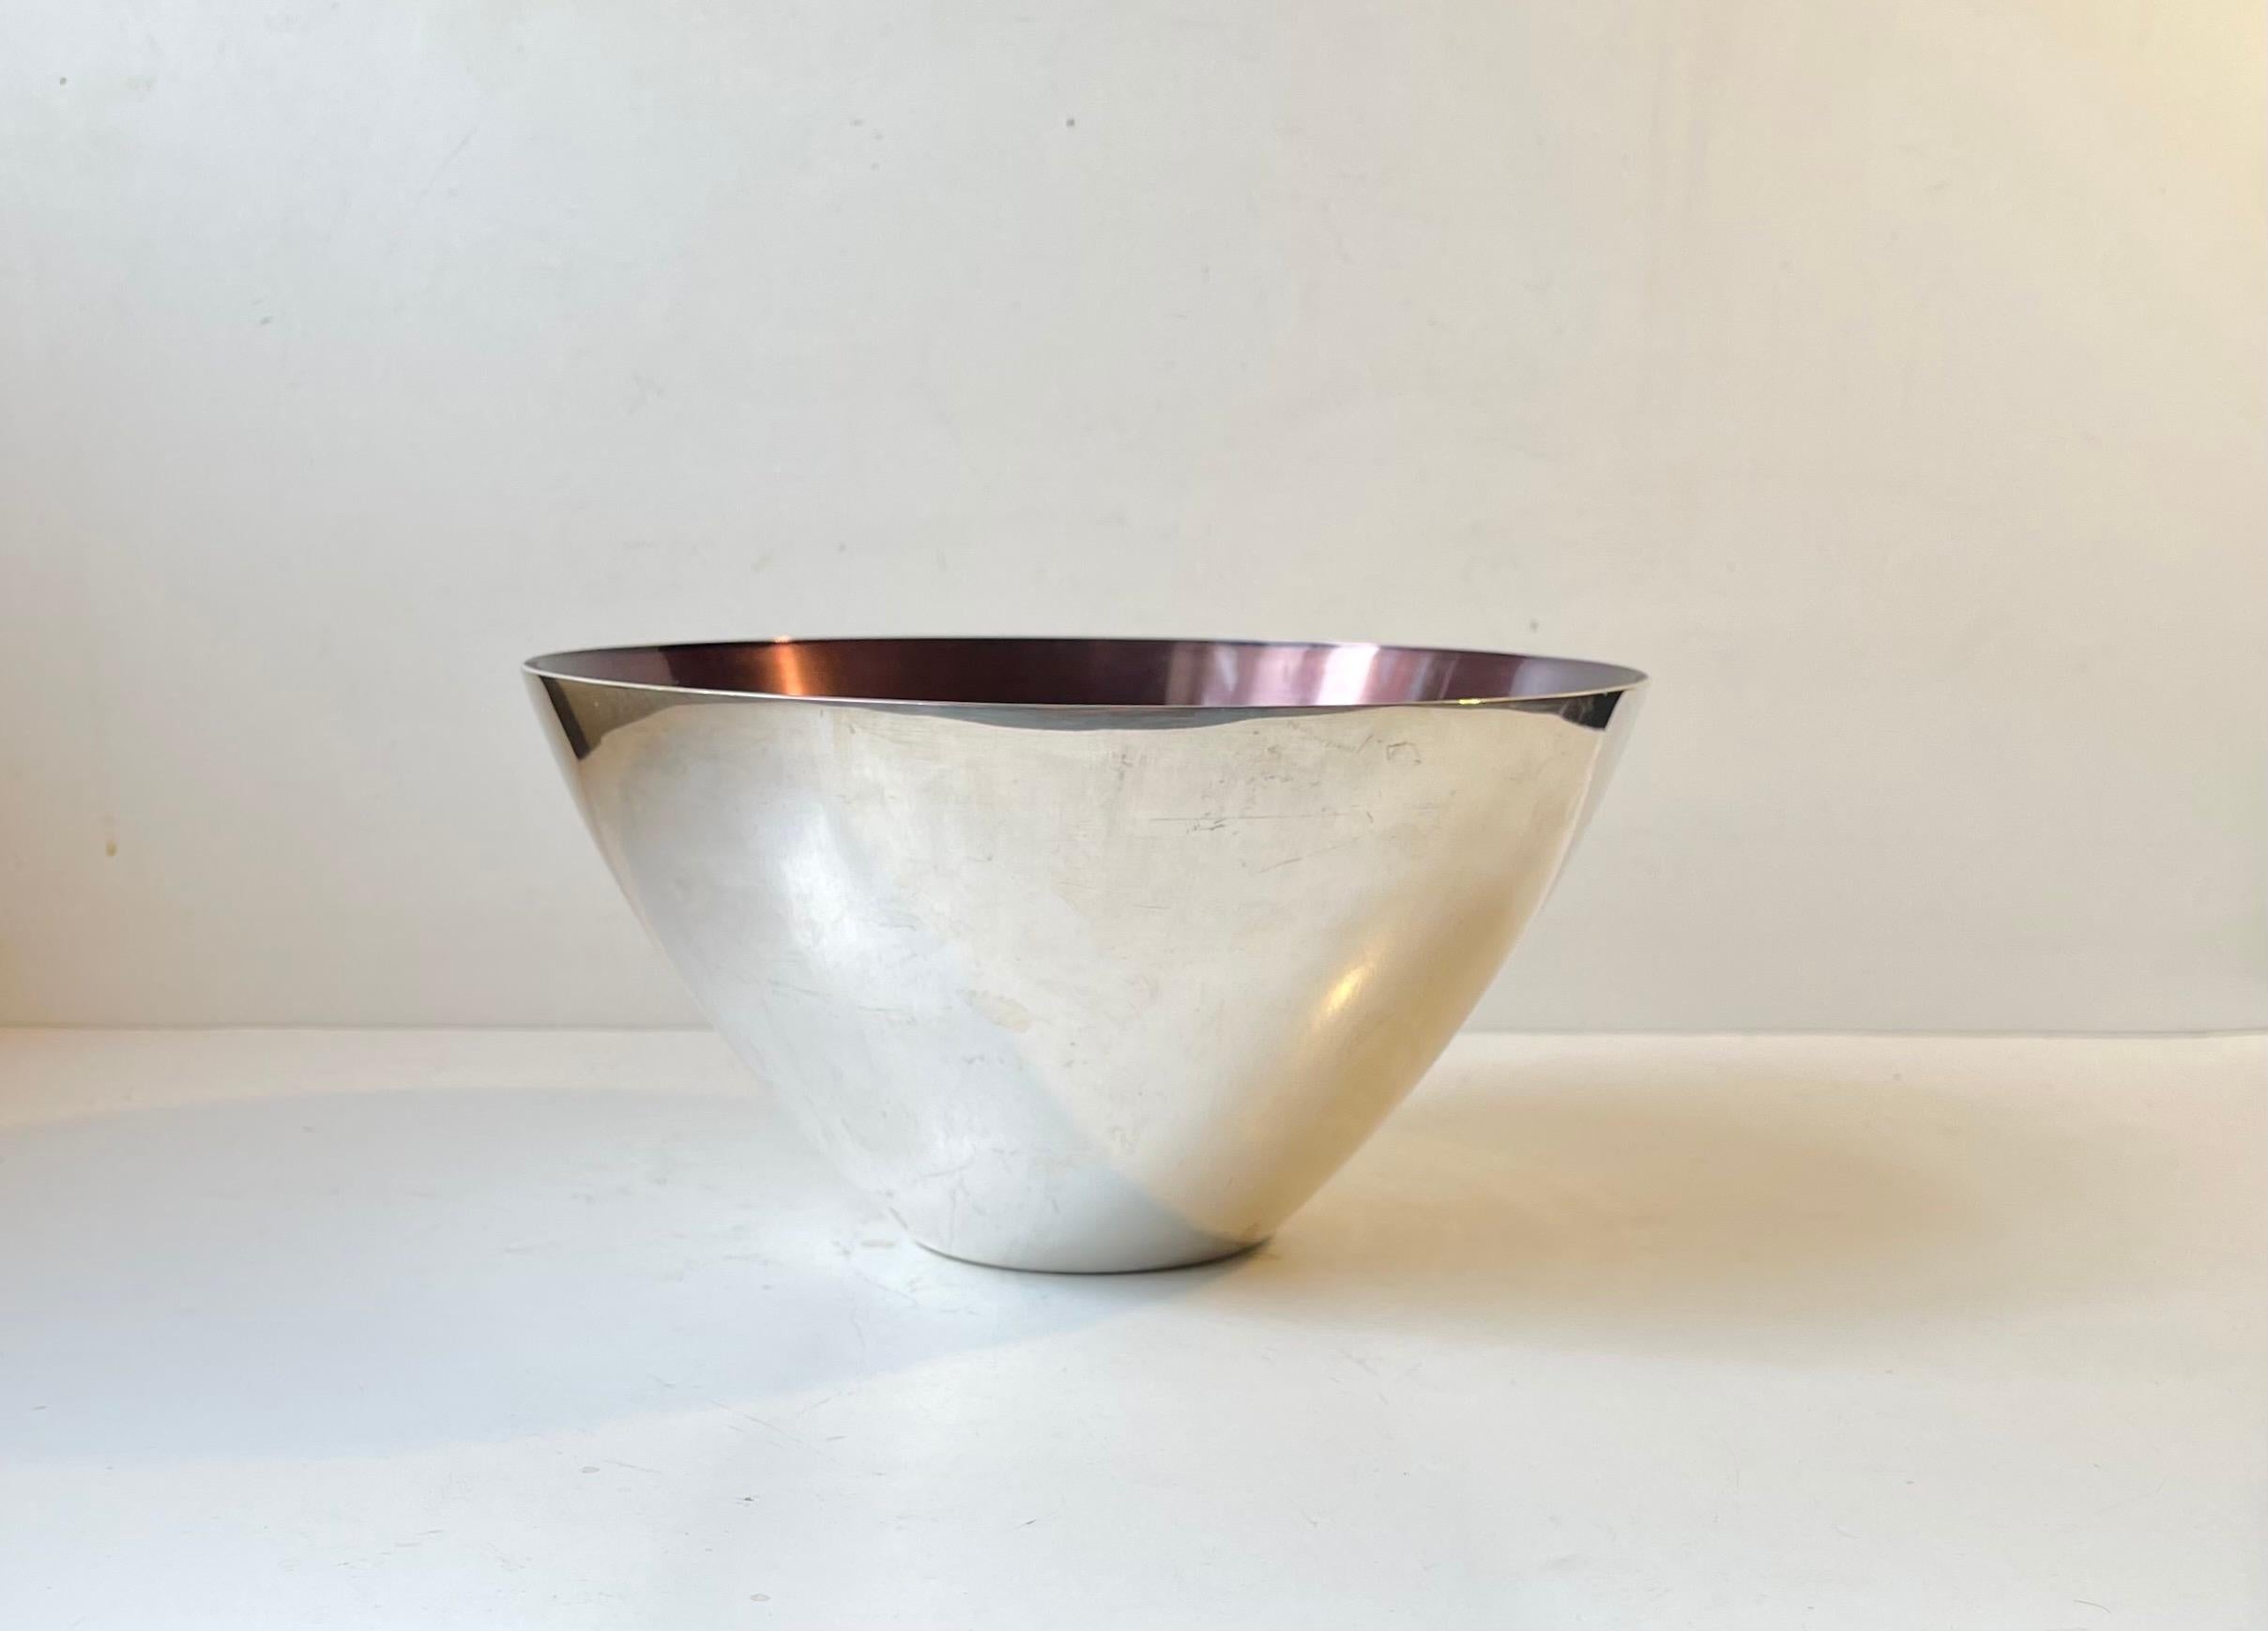 Large conical silver plate bowl decorated to the interior with a deep aubergine purple enamel. Manufactured and designed in Denmark during the late 1950s by DGS (Danish Silver- & Goldsmith association). Reminiscent in design to similar bowls by